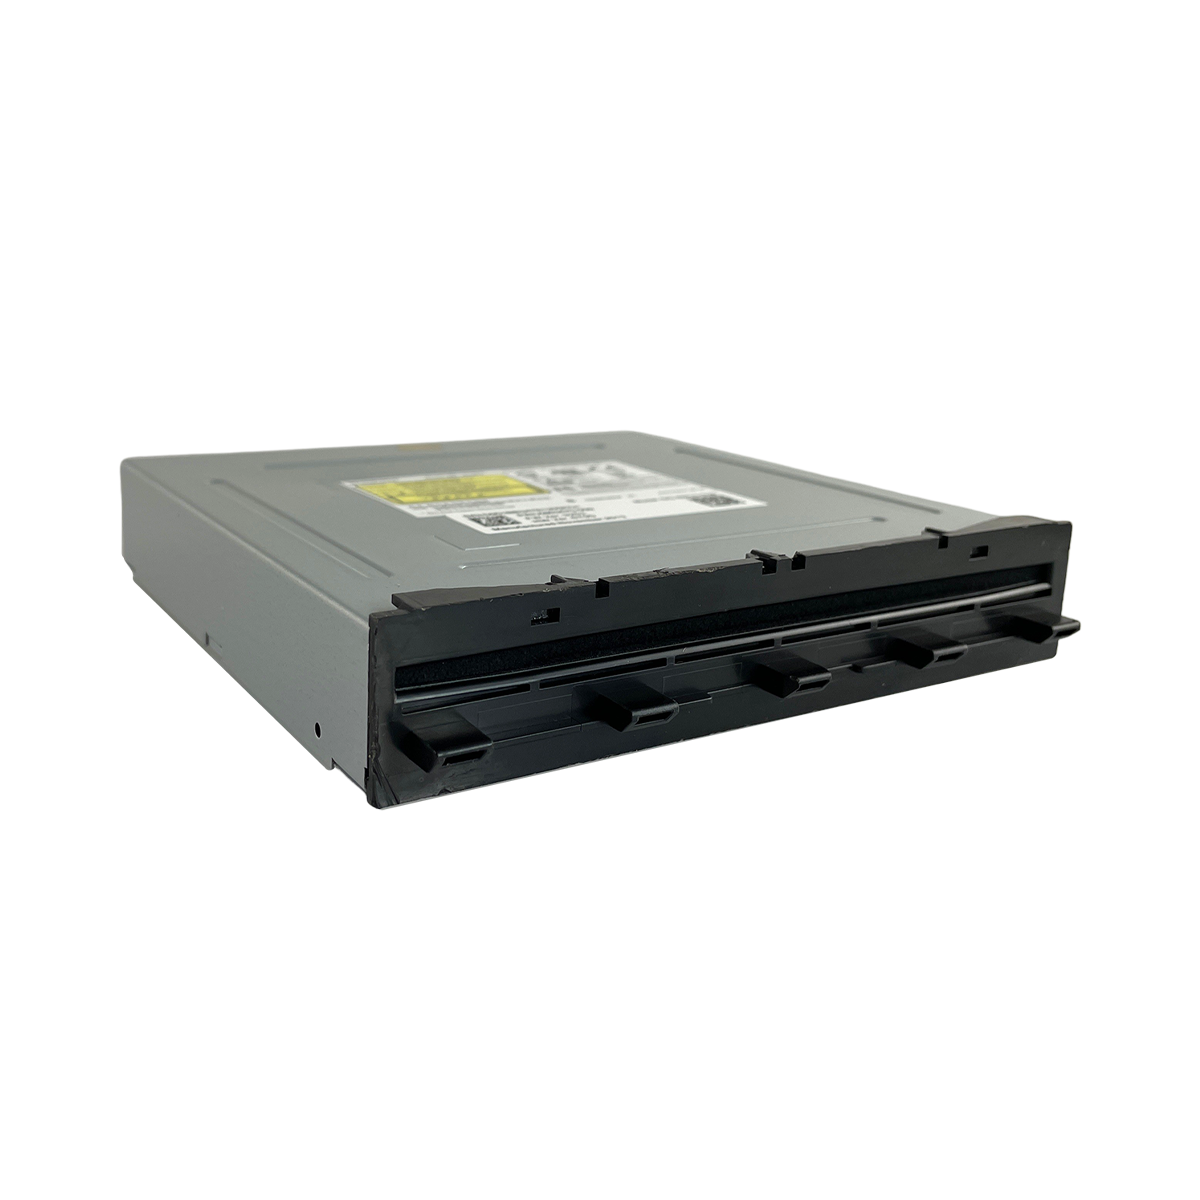 Xbox One Blu Ray DVD Disc Drive With Mainboard (DG-6M1S / DG-6M1S-01B)